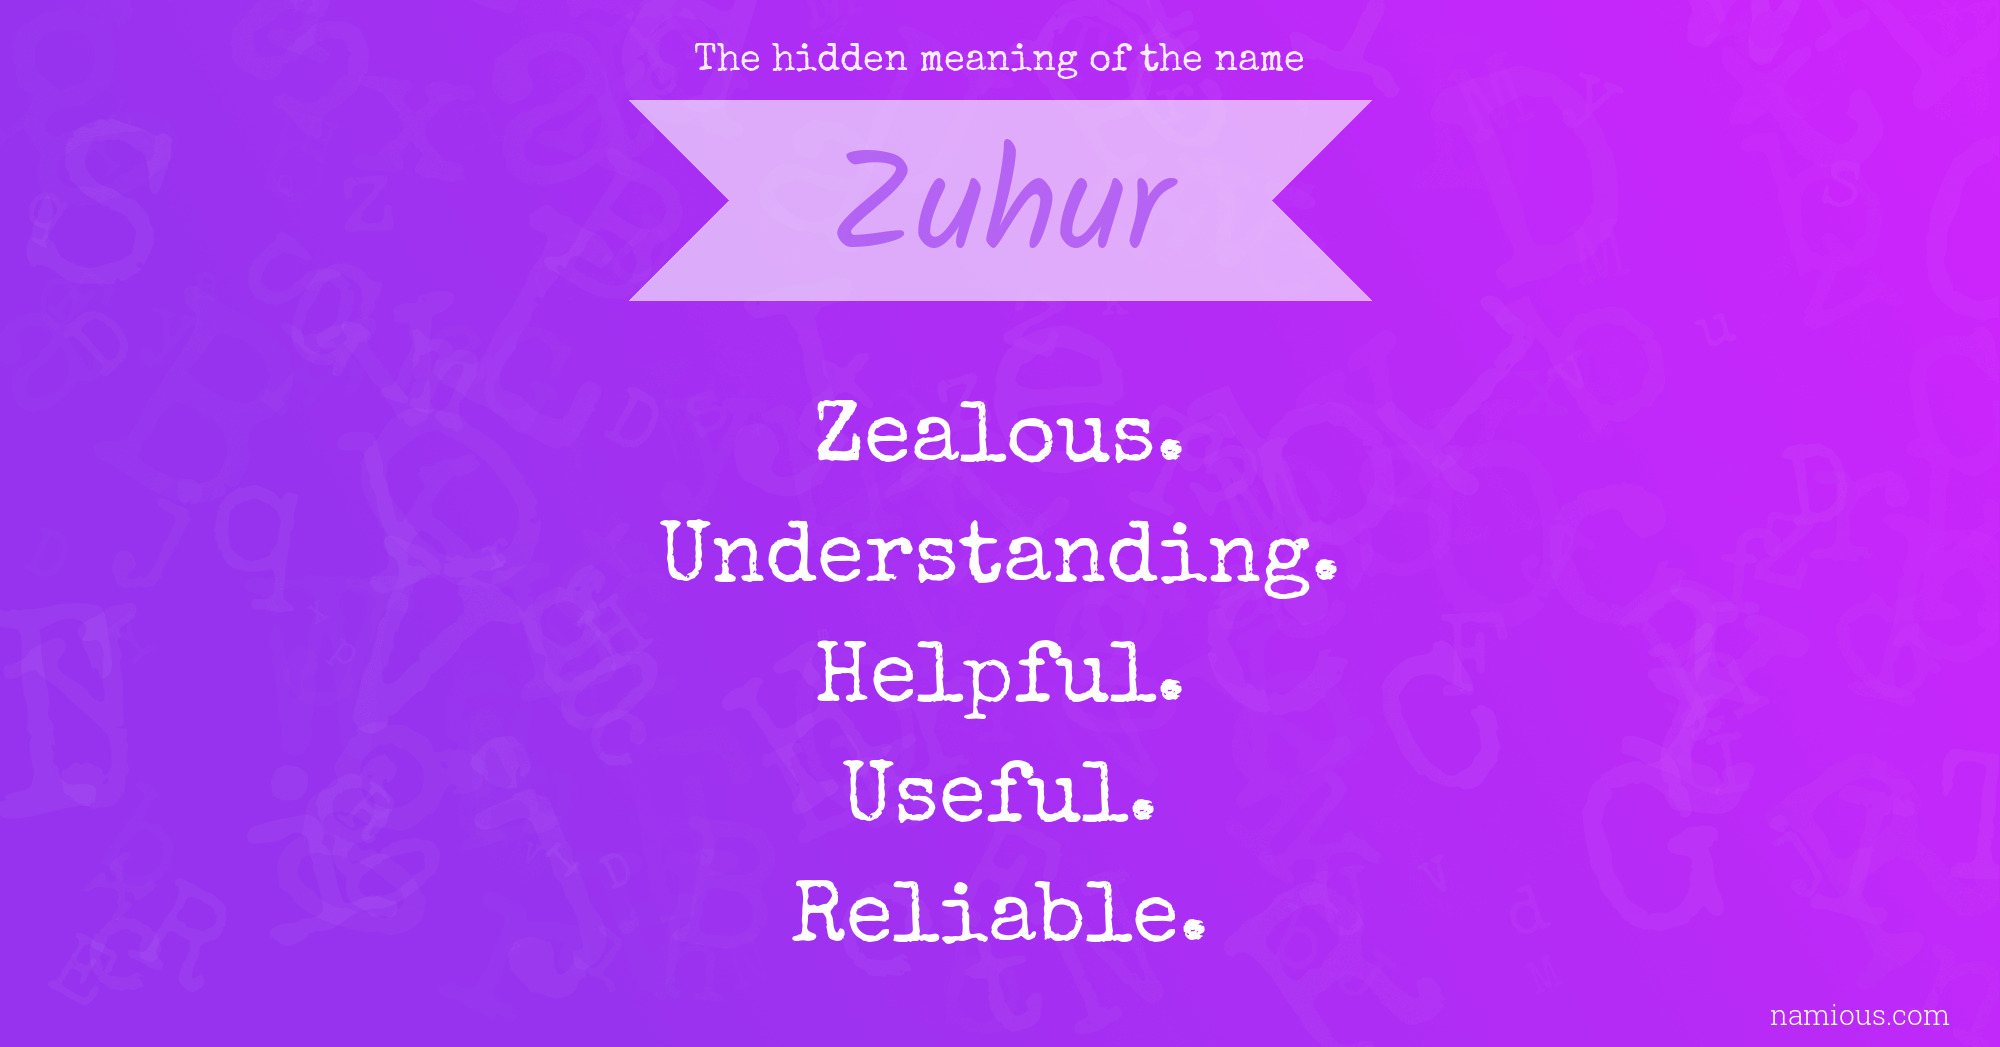 The hidden meaning of the name Zuhur